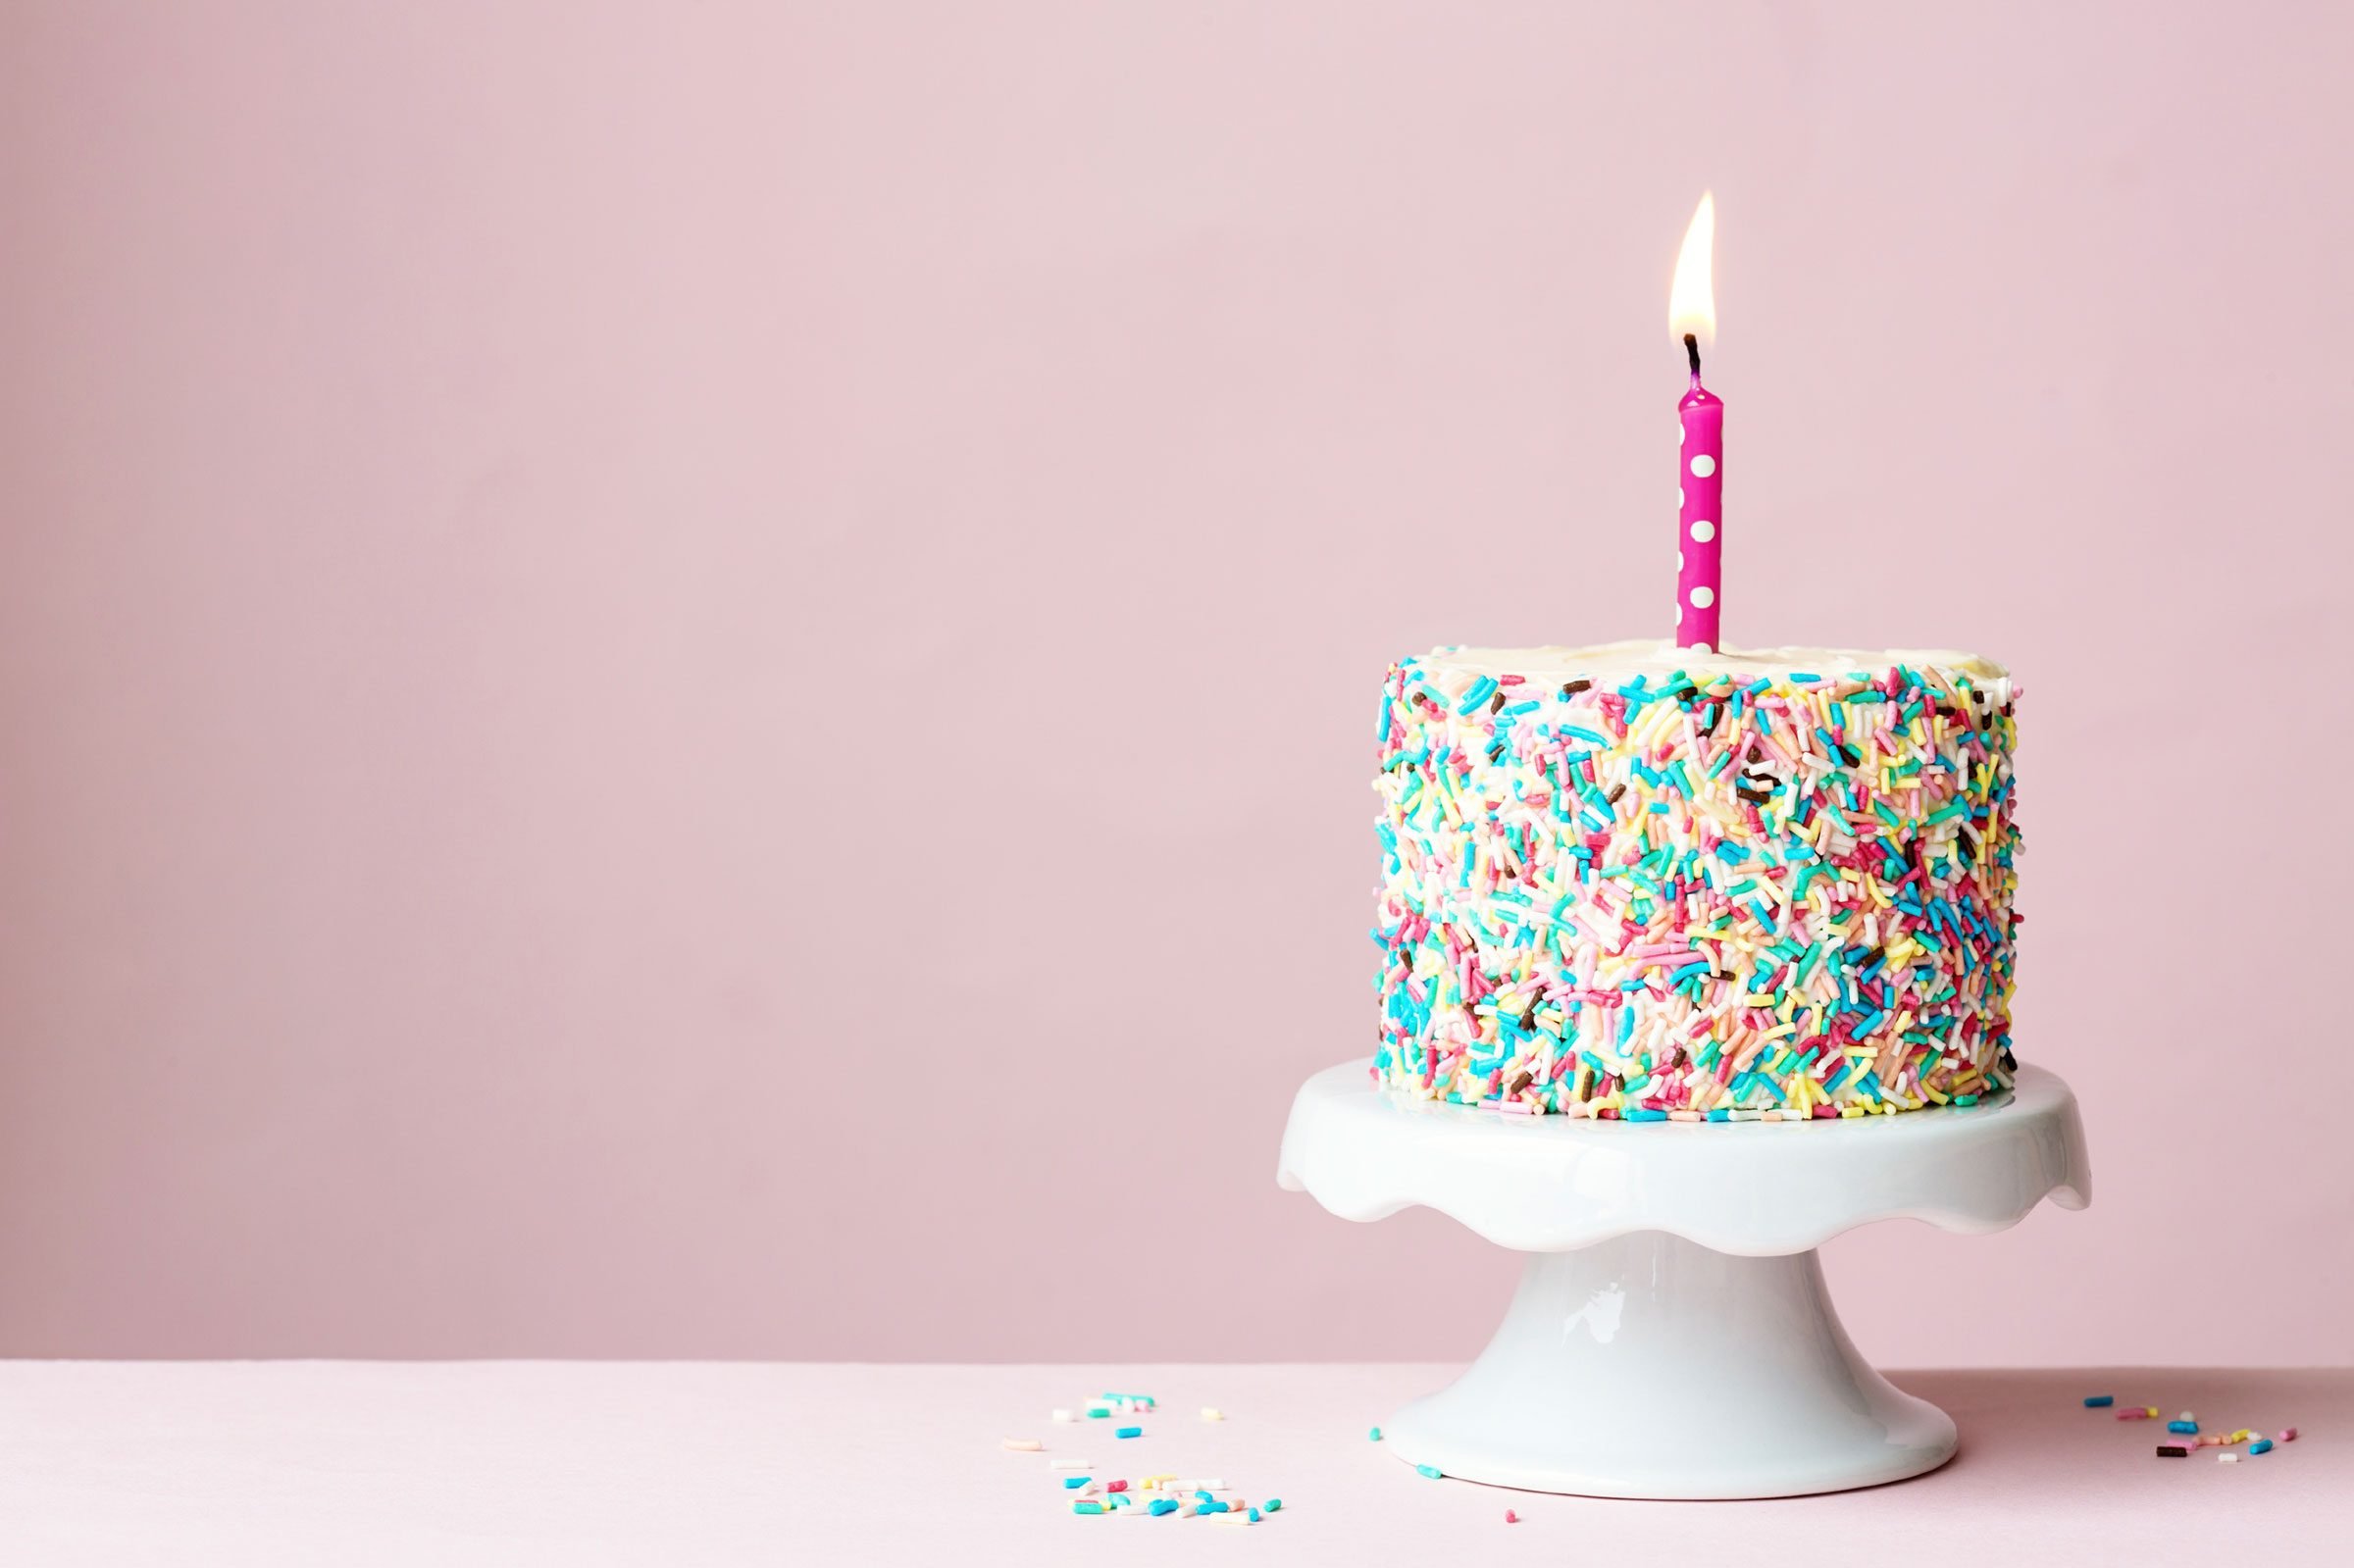 Things You Never Knew About the Happy Birthday Song